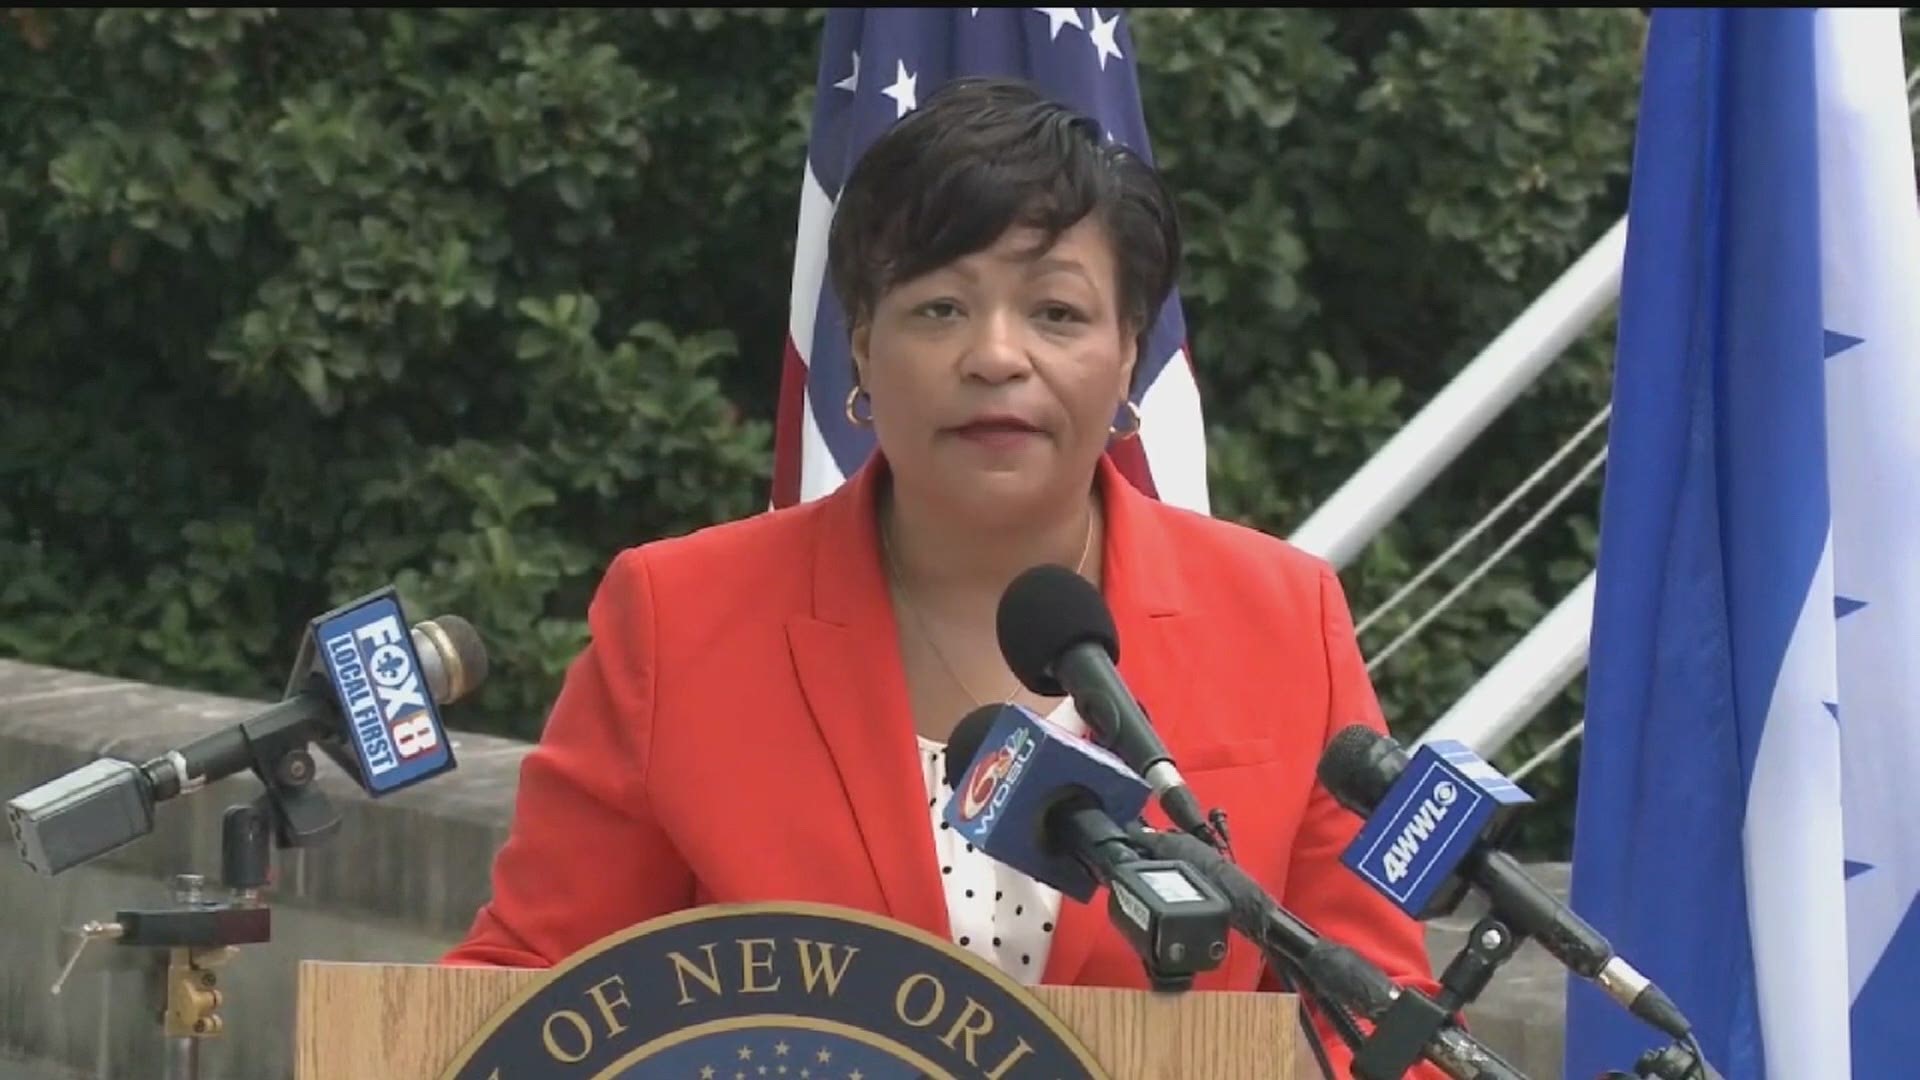 New Orleans Mayor LaToya Cantrell talked Thursday about the possibility of the Saints playing some games in Baton Rouge, which she called a 'great idea - temporarily